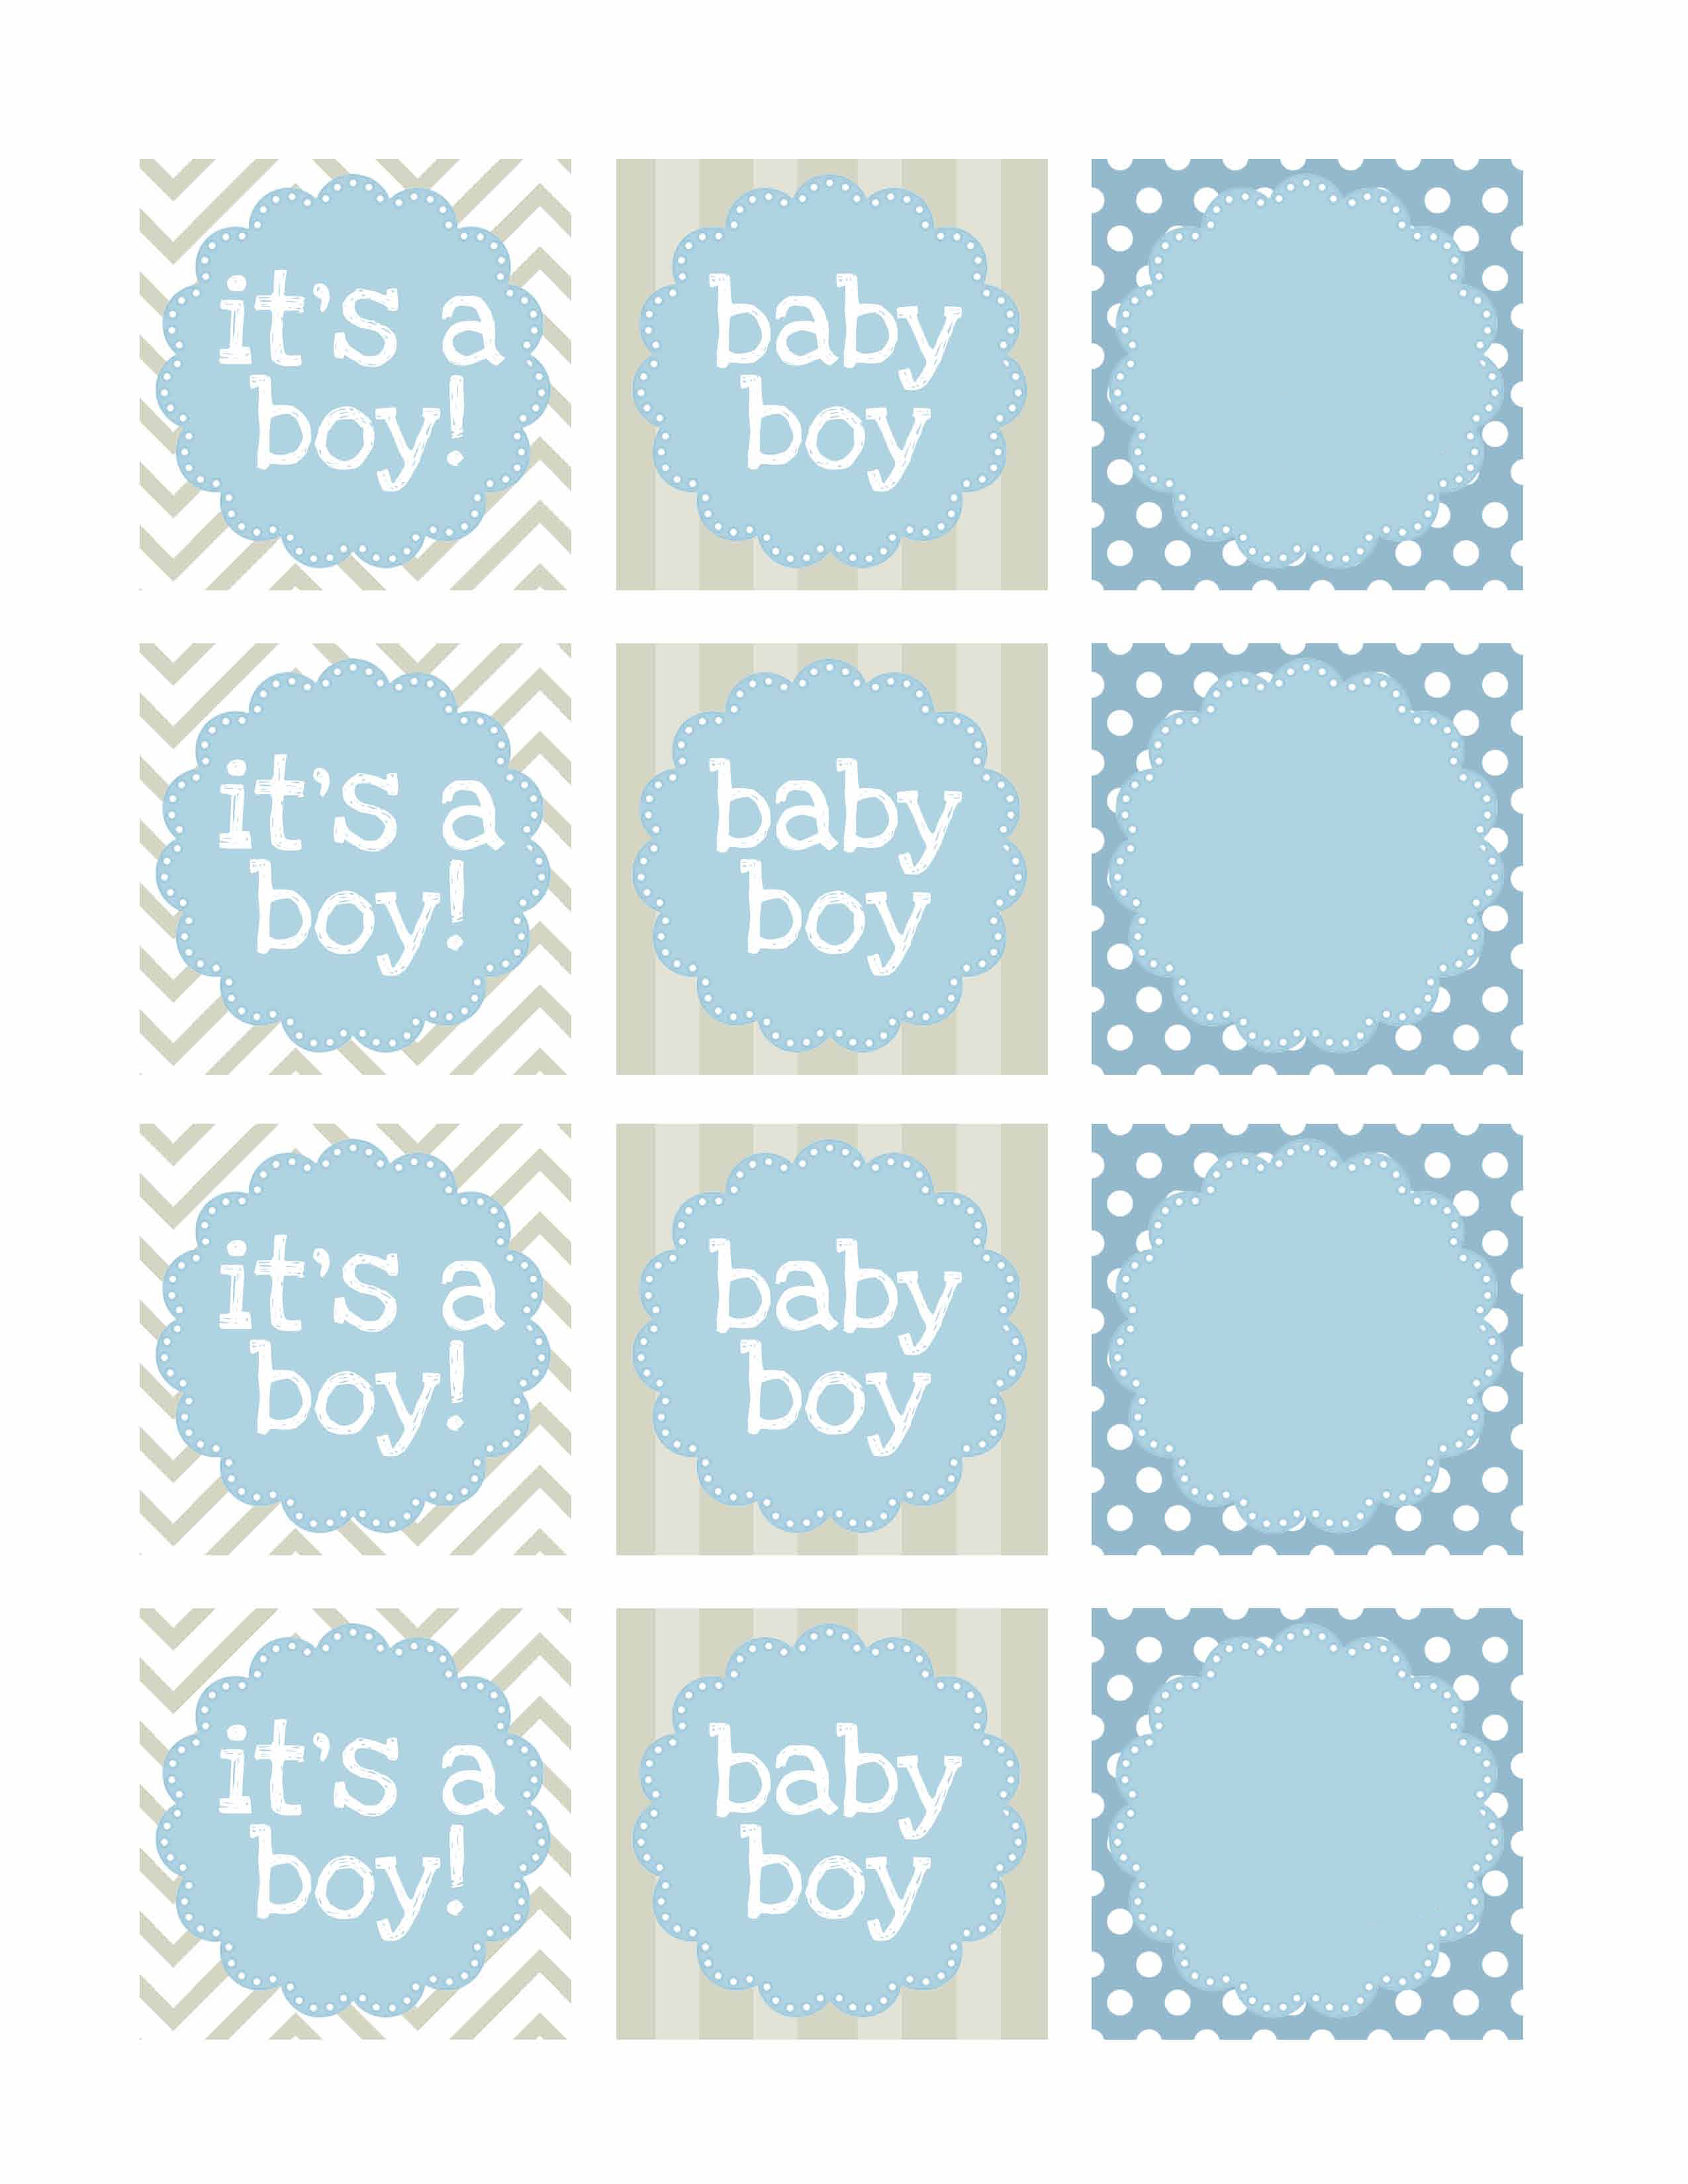 5-best-images-of-baby-shower-favor-tags-printable-baby-shower-favor-tag-printables-free